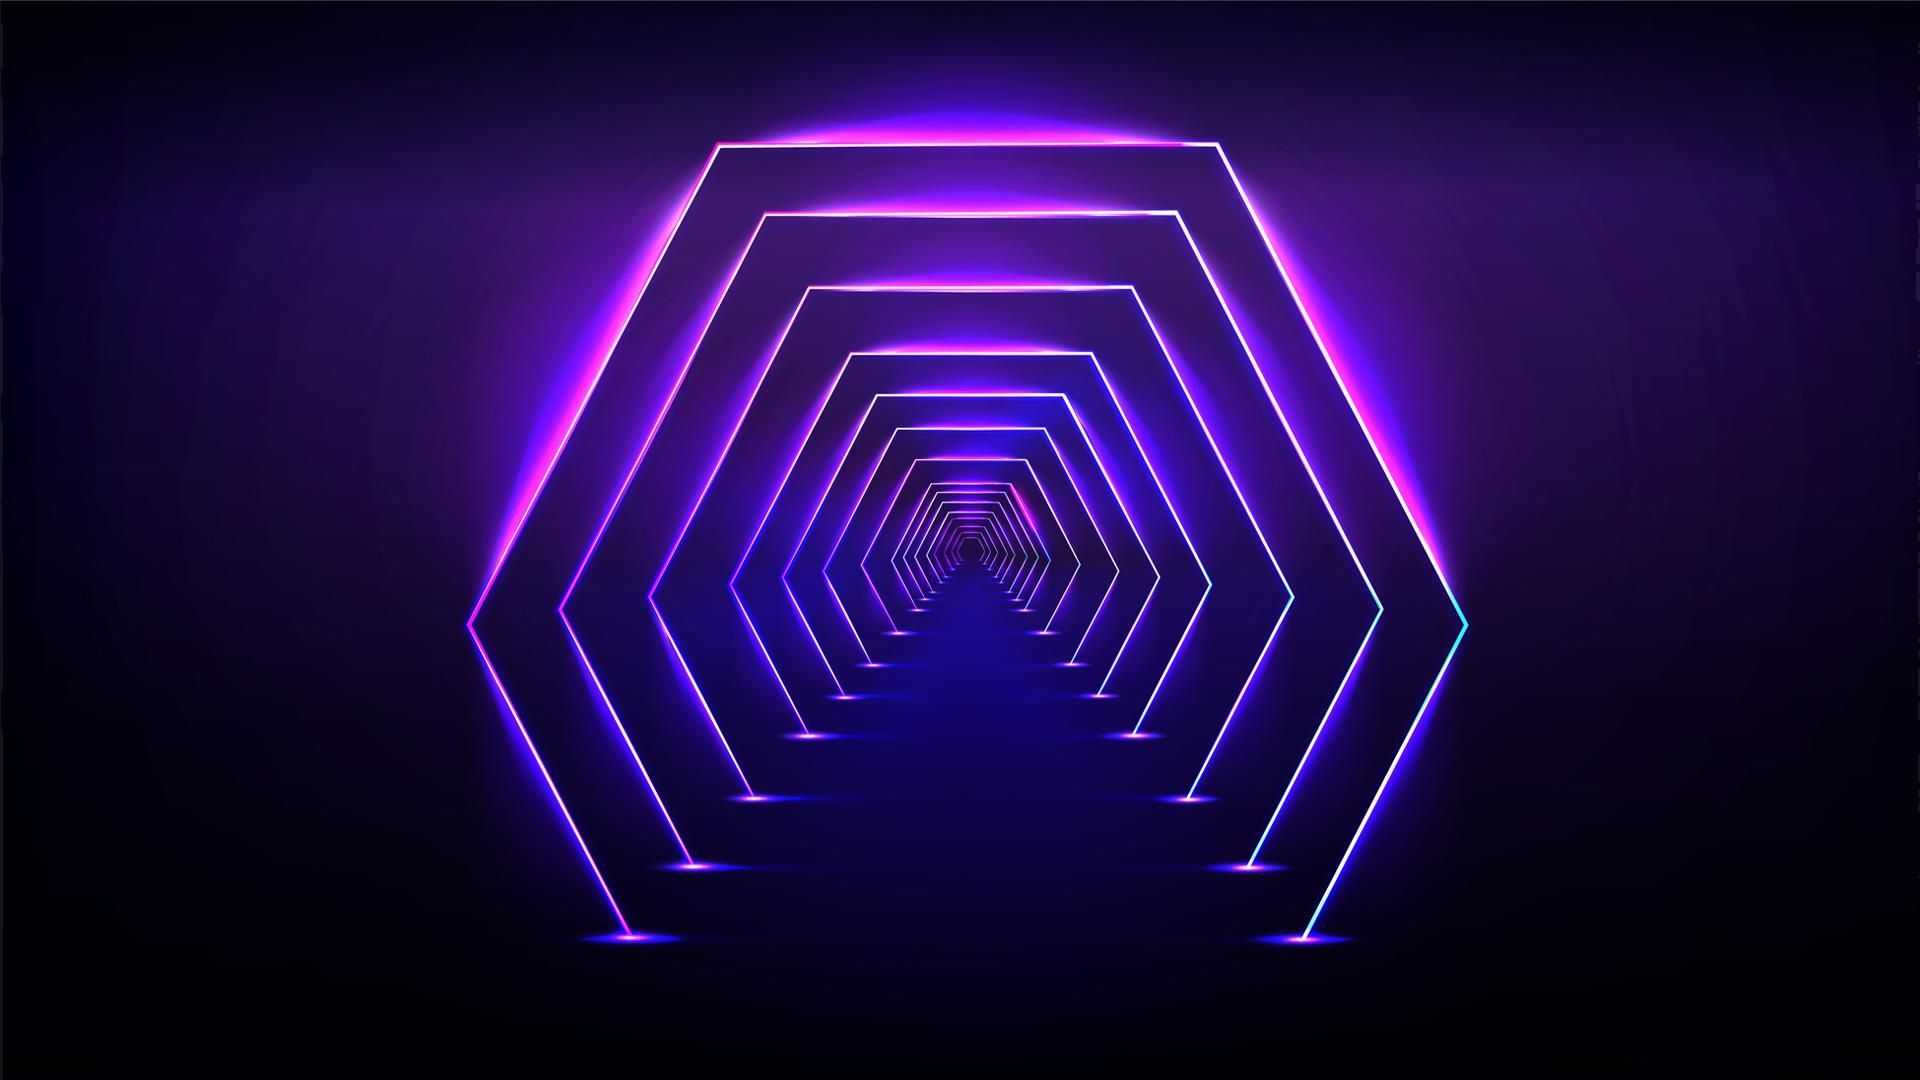 Ultraviolet Endless Seamless Tunell Full HD [1920x1080]. Desktop wallpaper art, Wallpaper pc, Wallpaper pc 1920x1080